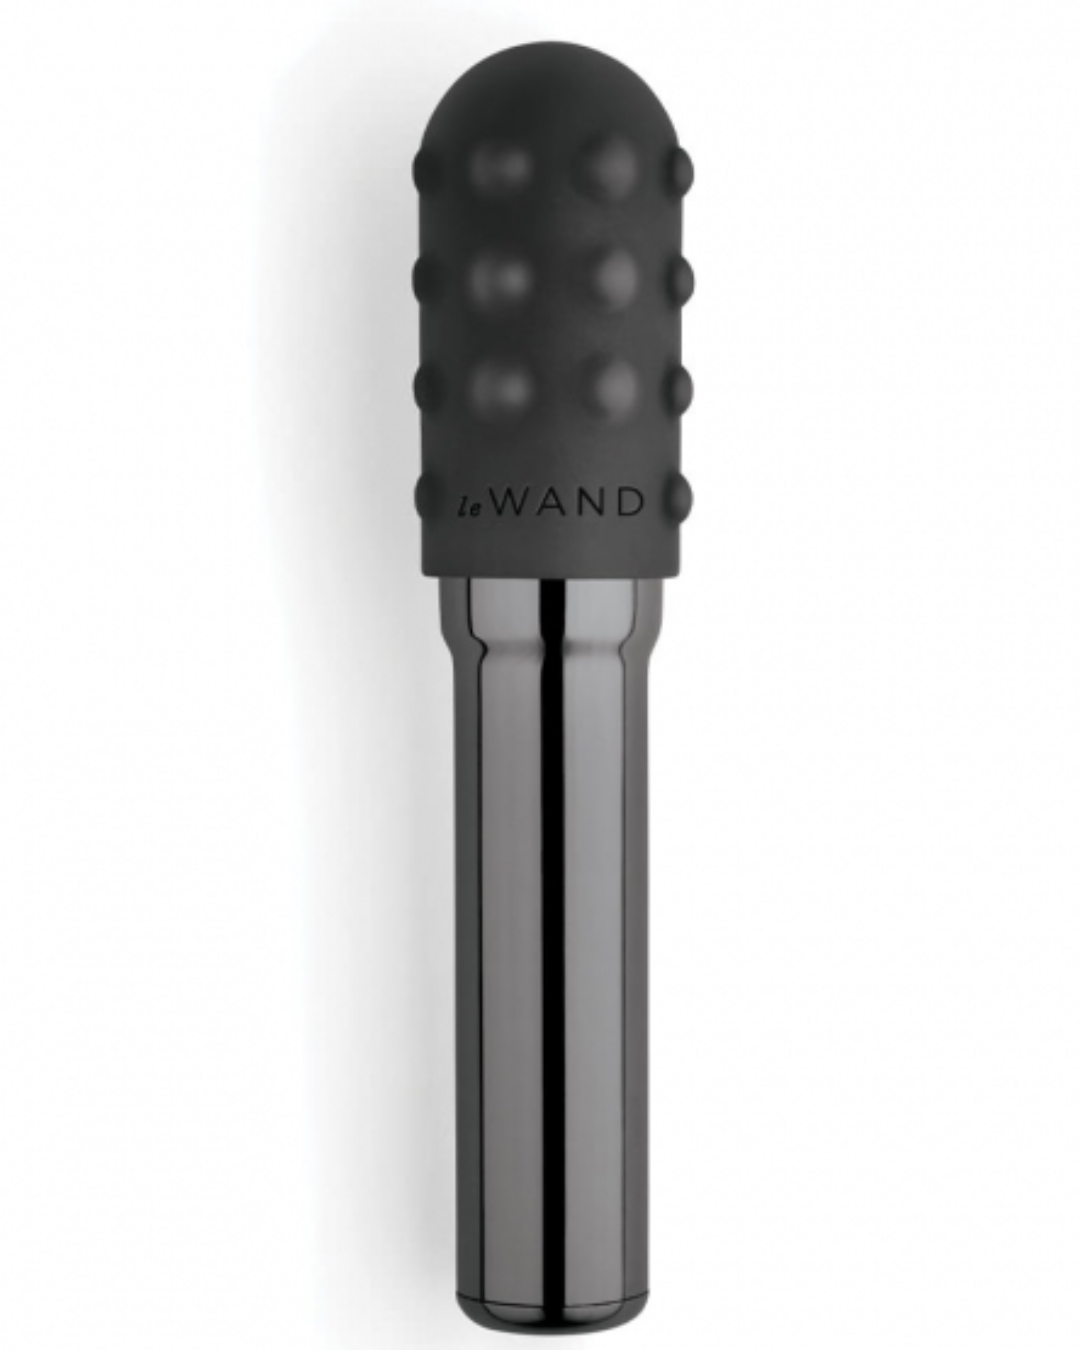 Le Wand Chrome Grand Bullet Waterproof Rechargeable Metal Bullet with Texture Sleeve - Black with texture sleeve